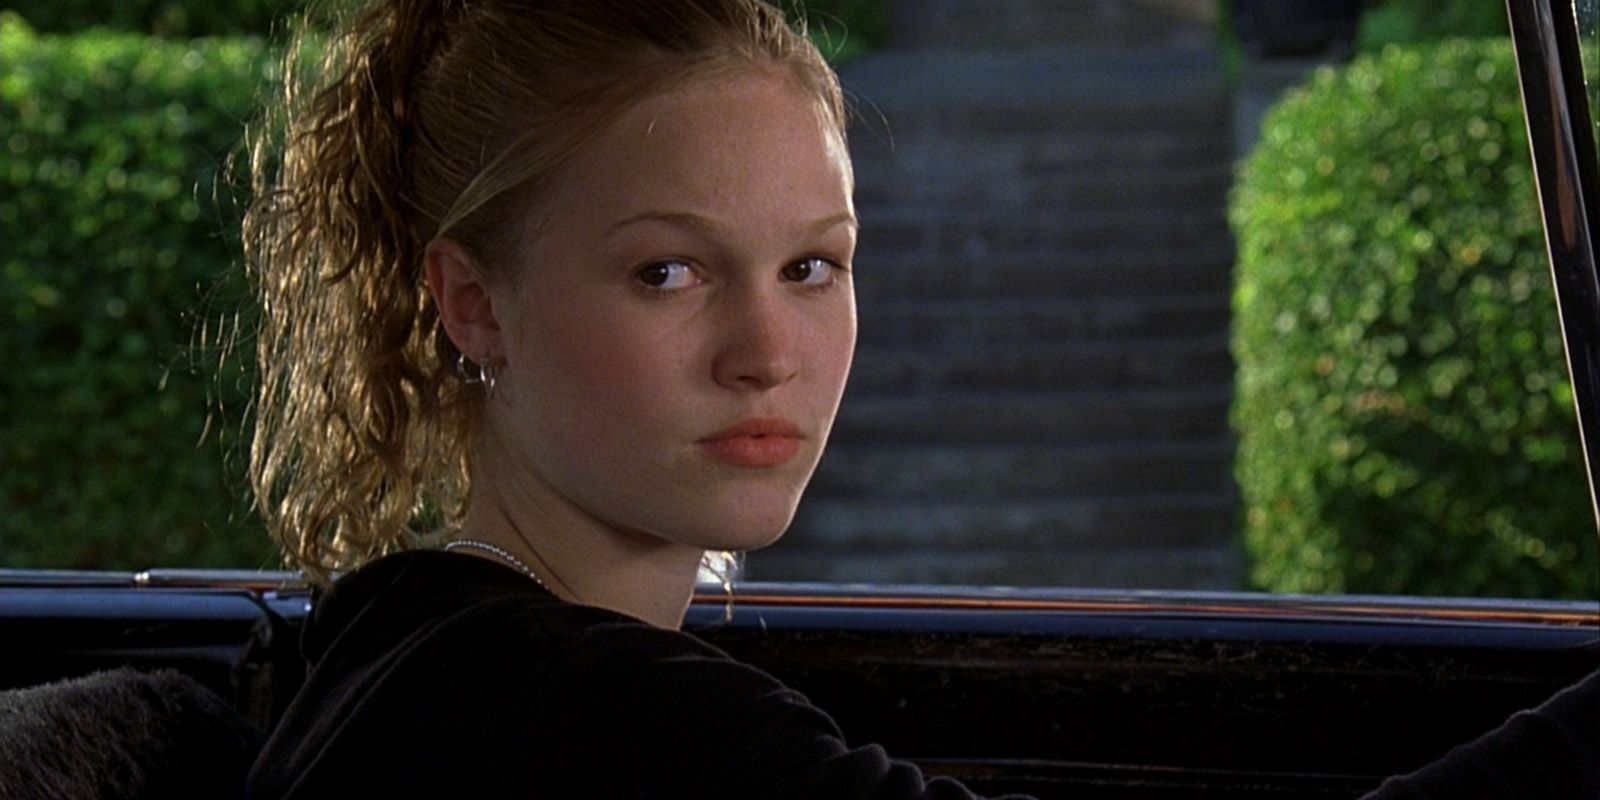 How 10 Things I Hate About You Is Different From The Shakespeare Play